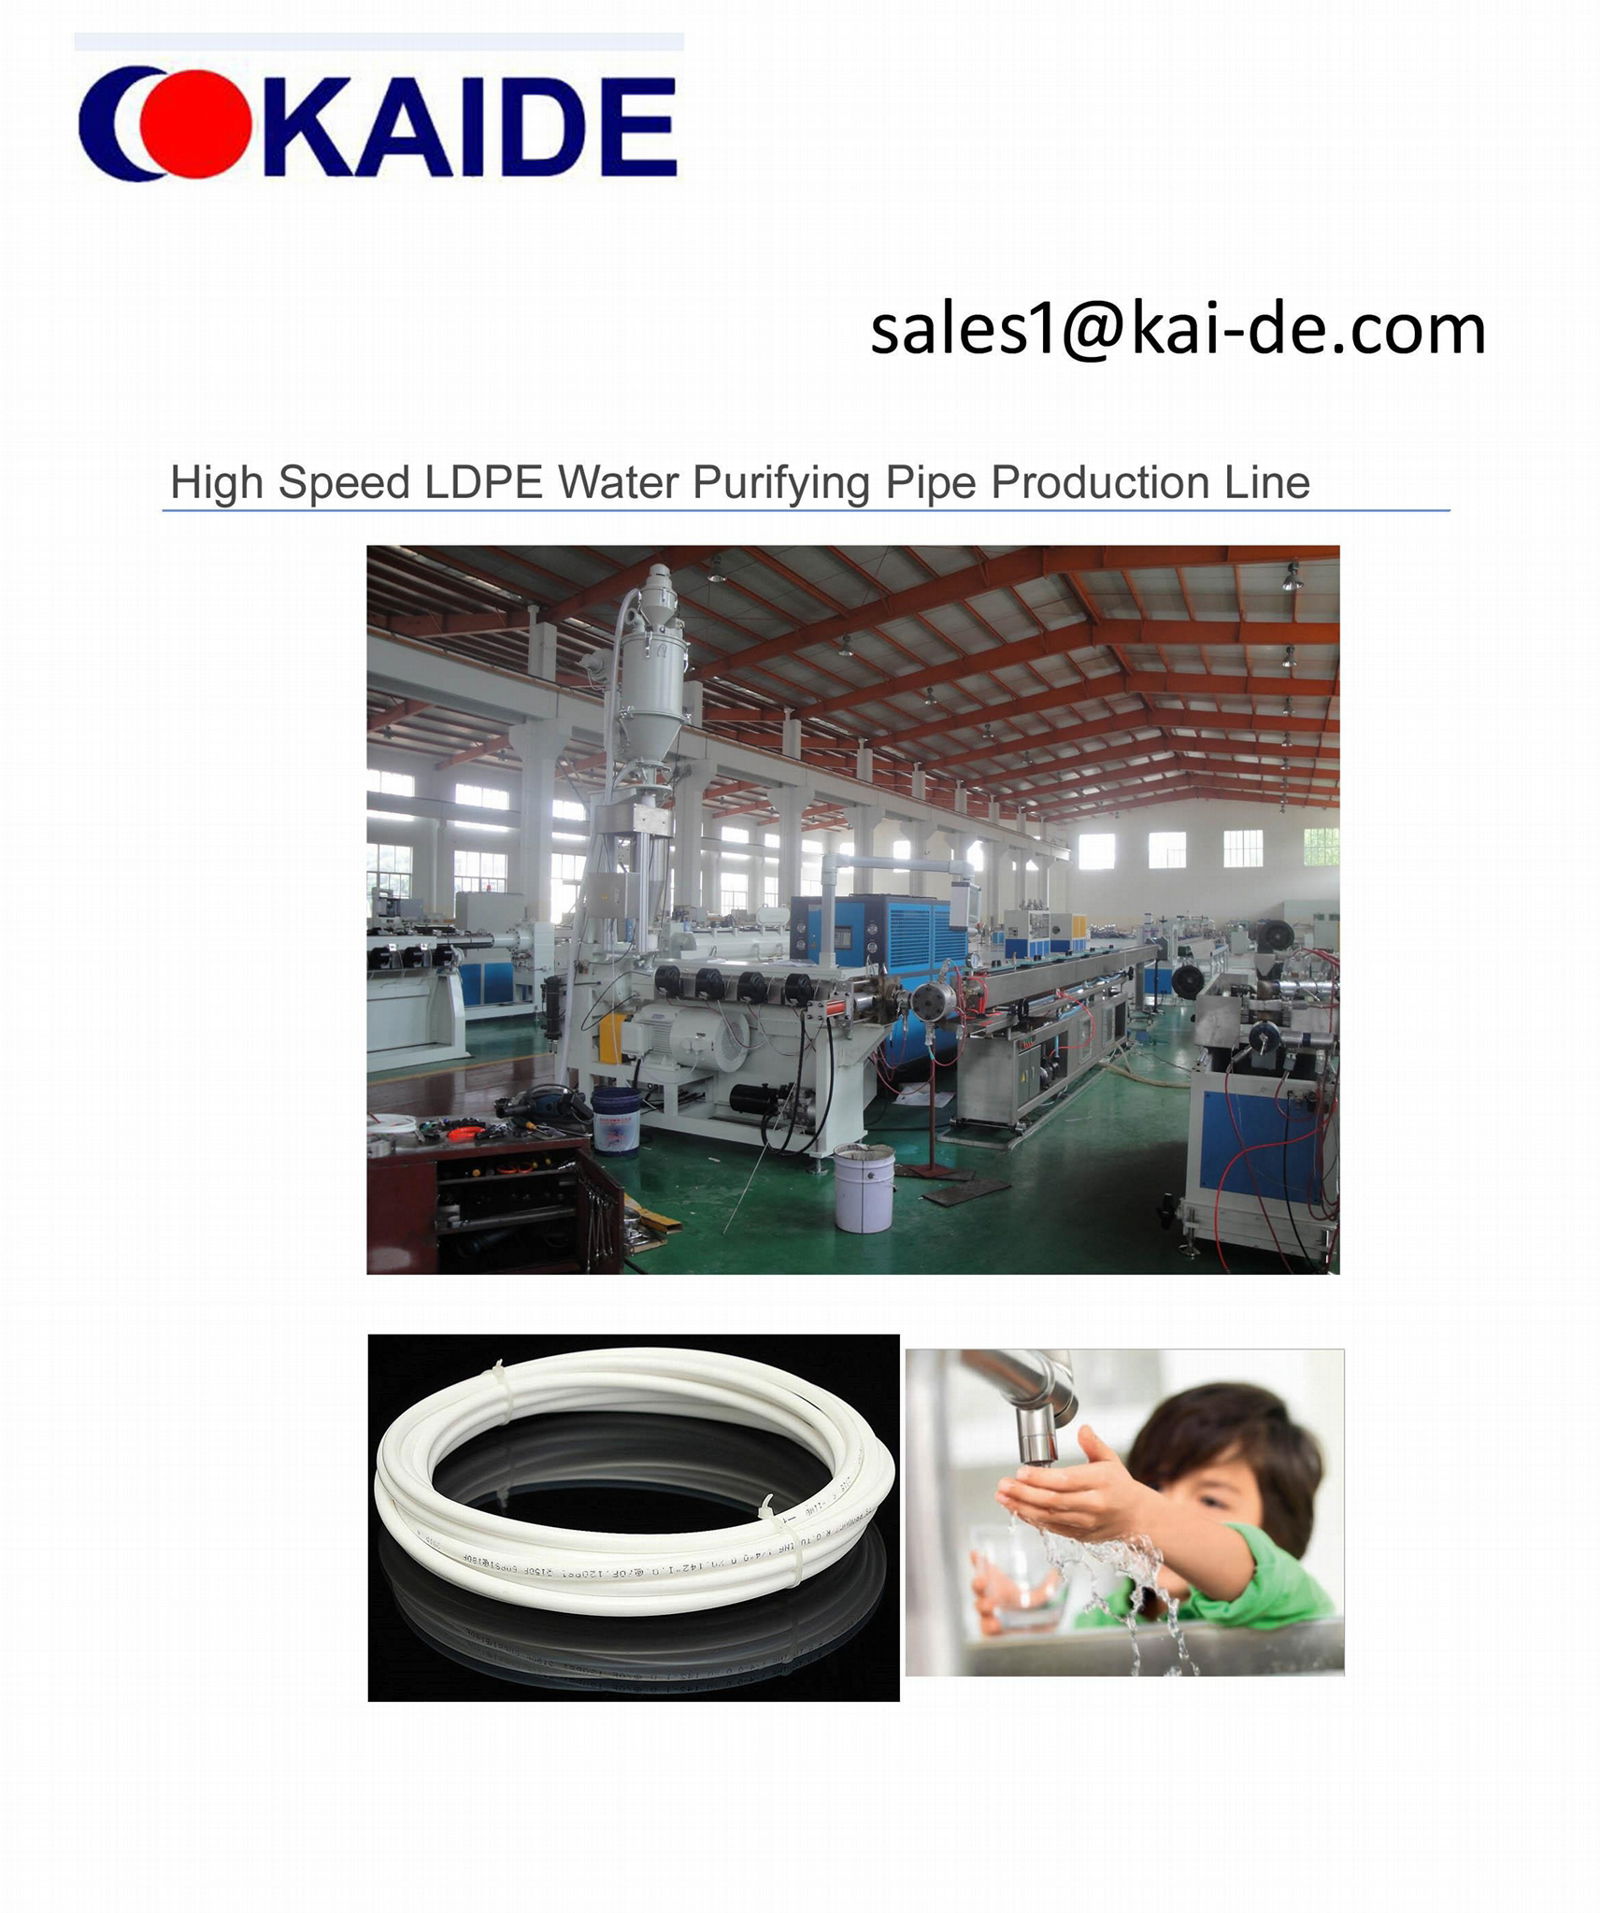 High Speed LDPE Water Purifying Pipe Production Line